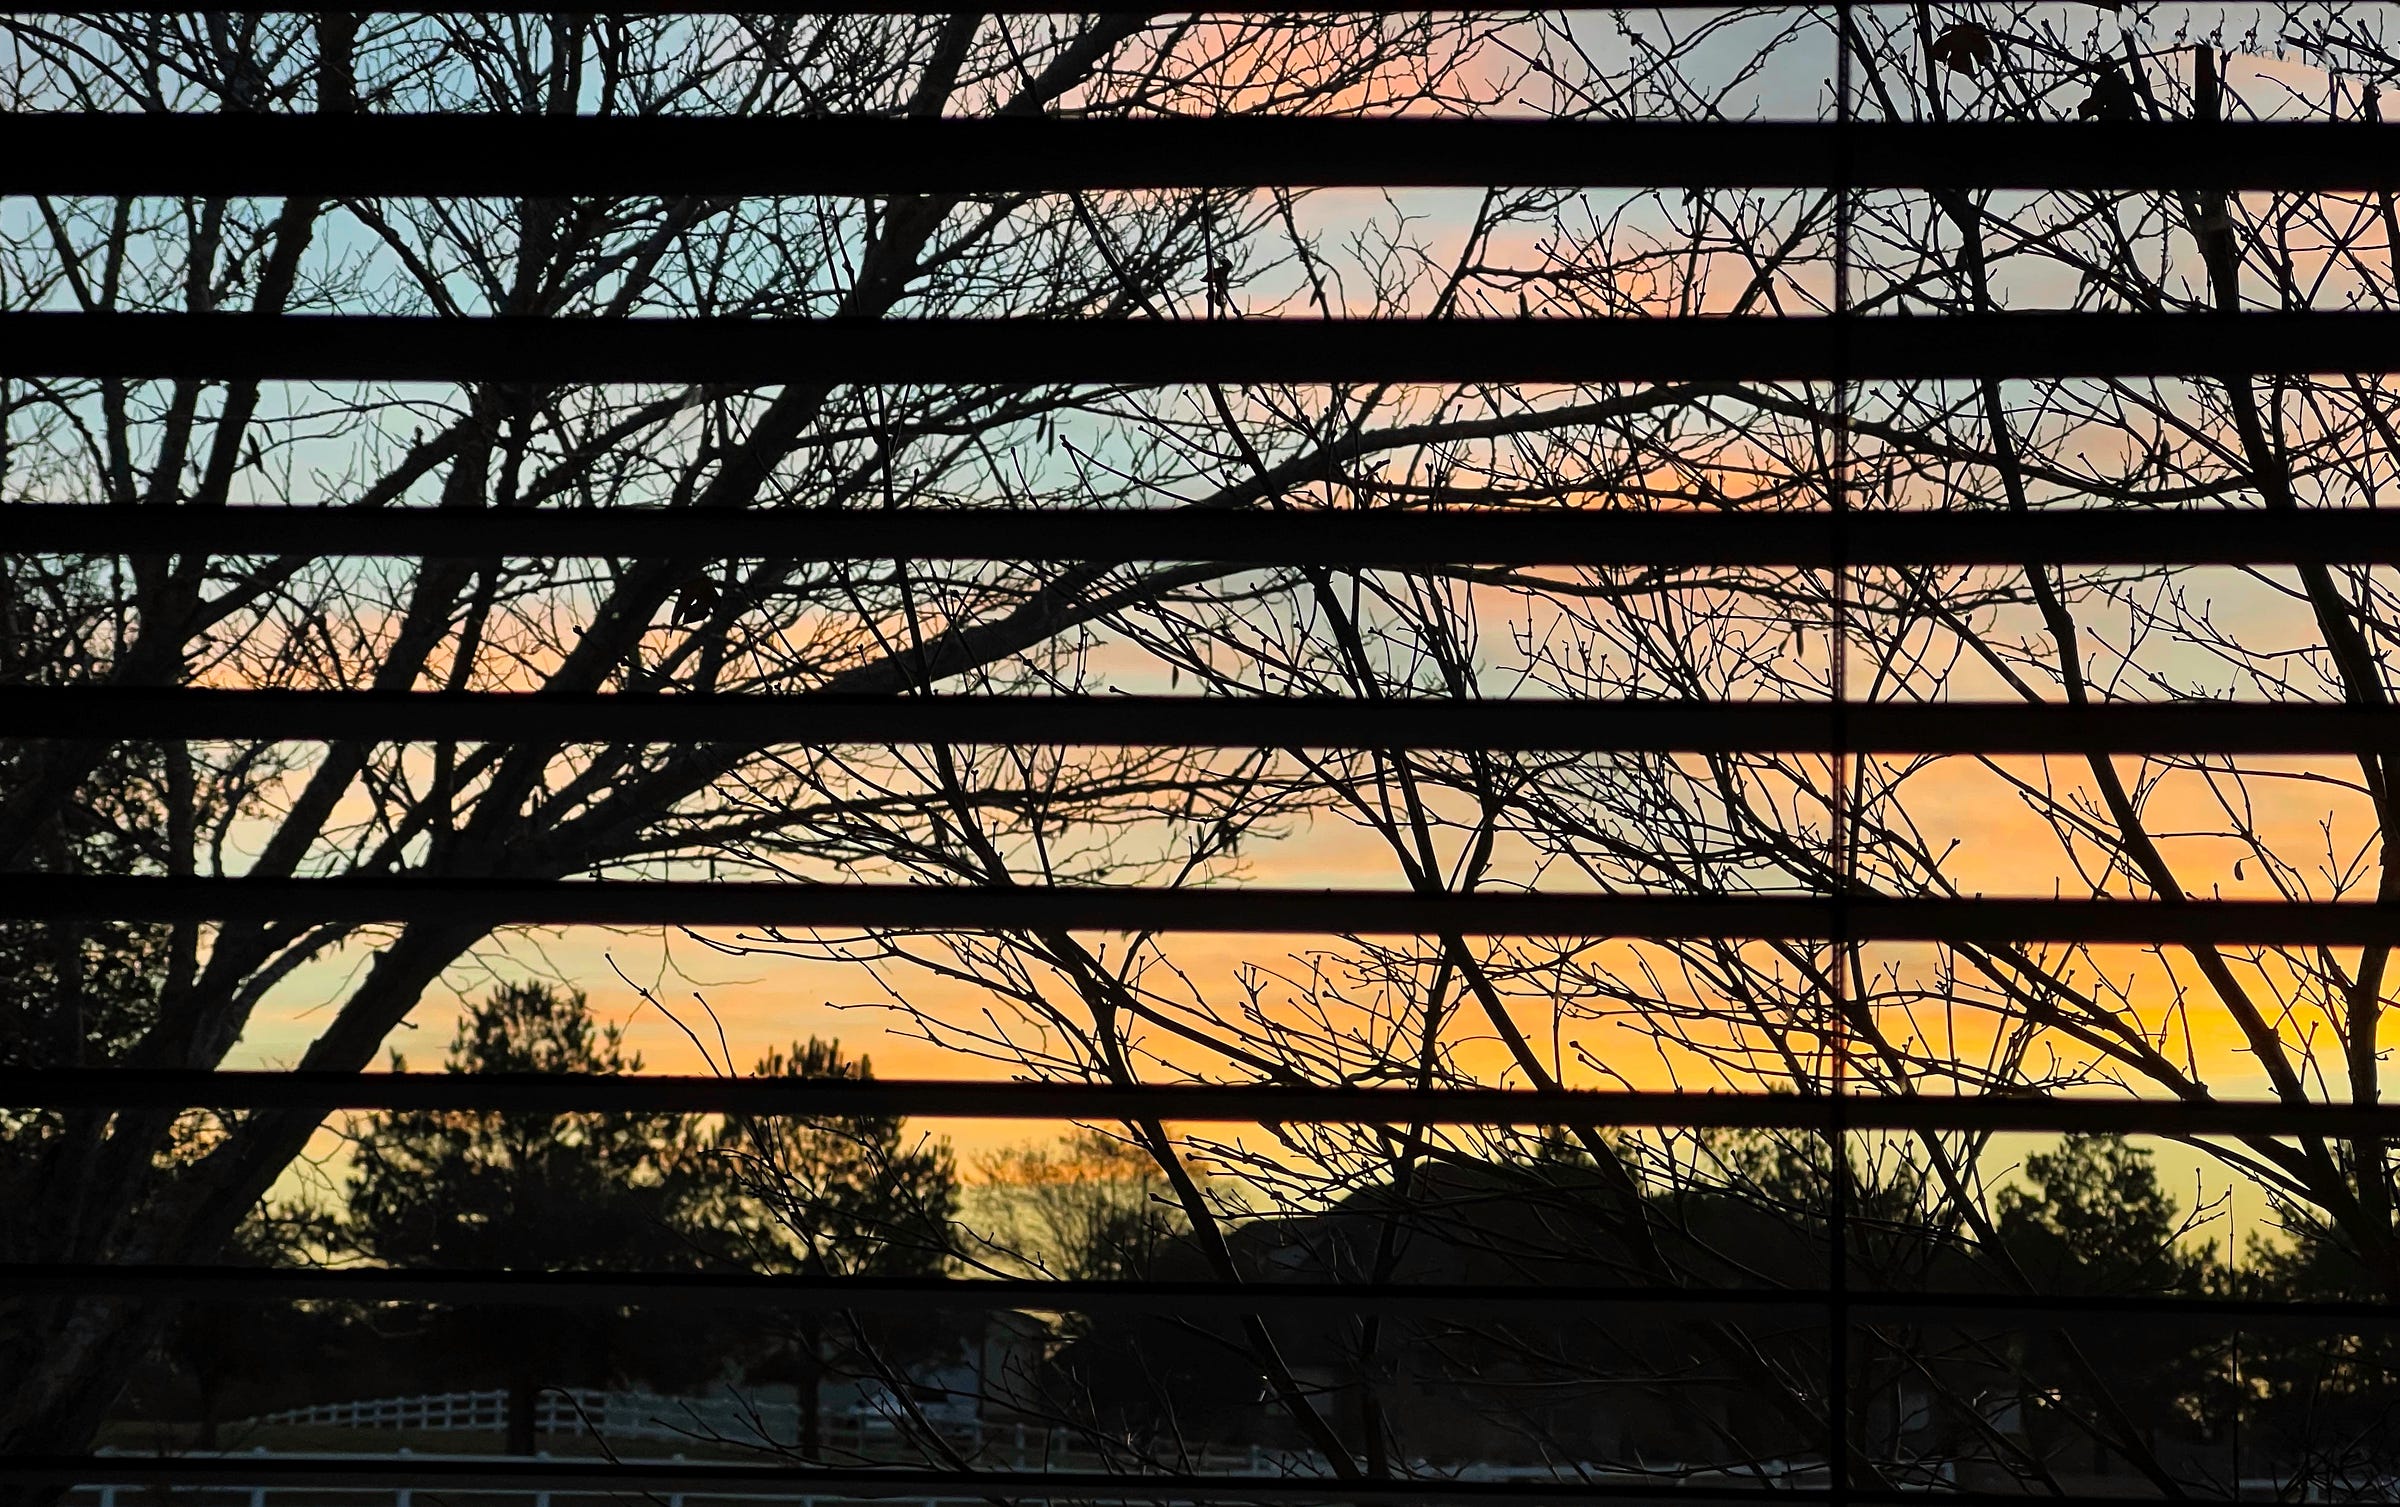 A view of the morning sunrise through a window with open wooden blinds; pink and coral clouds against a blue sky looking through tree branches; trees and a white fence in the bottom foreground